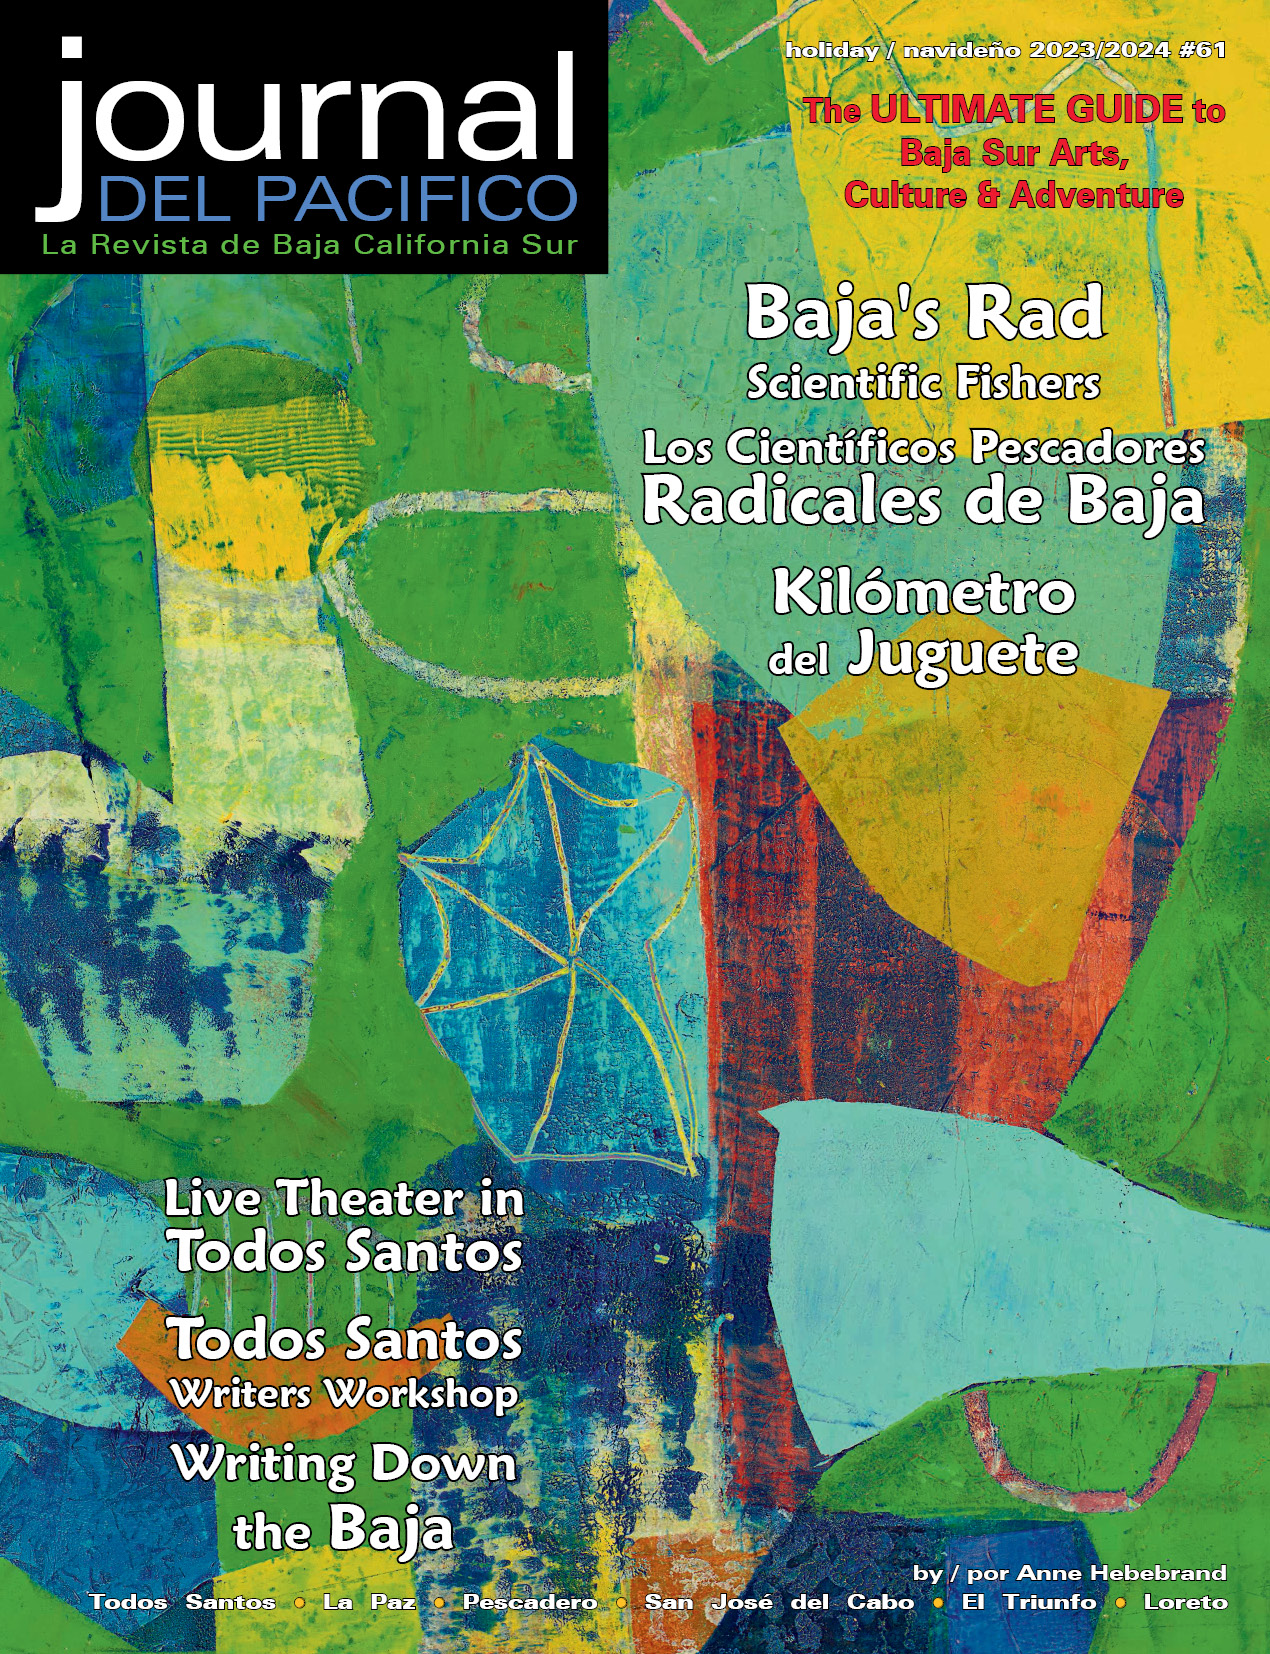 Holiday/Navideño 2023/24 Issue of Journal del Pacifico